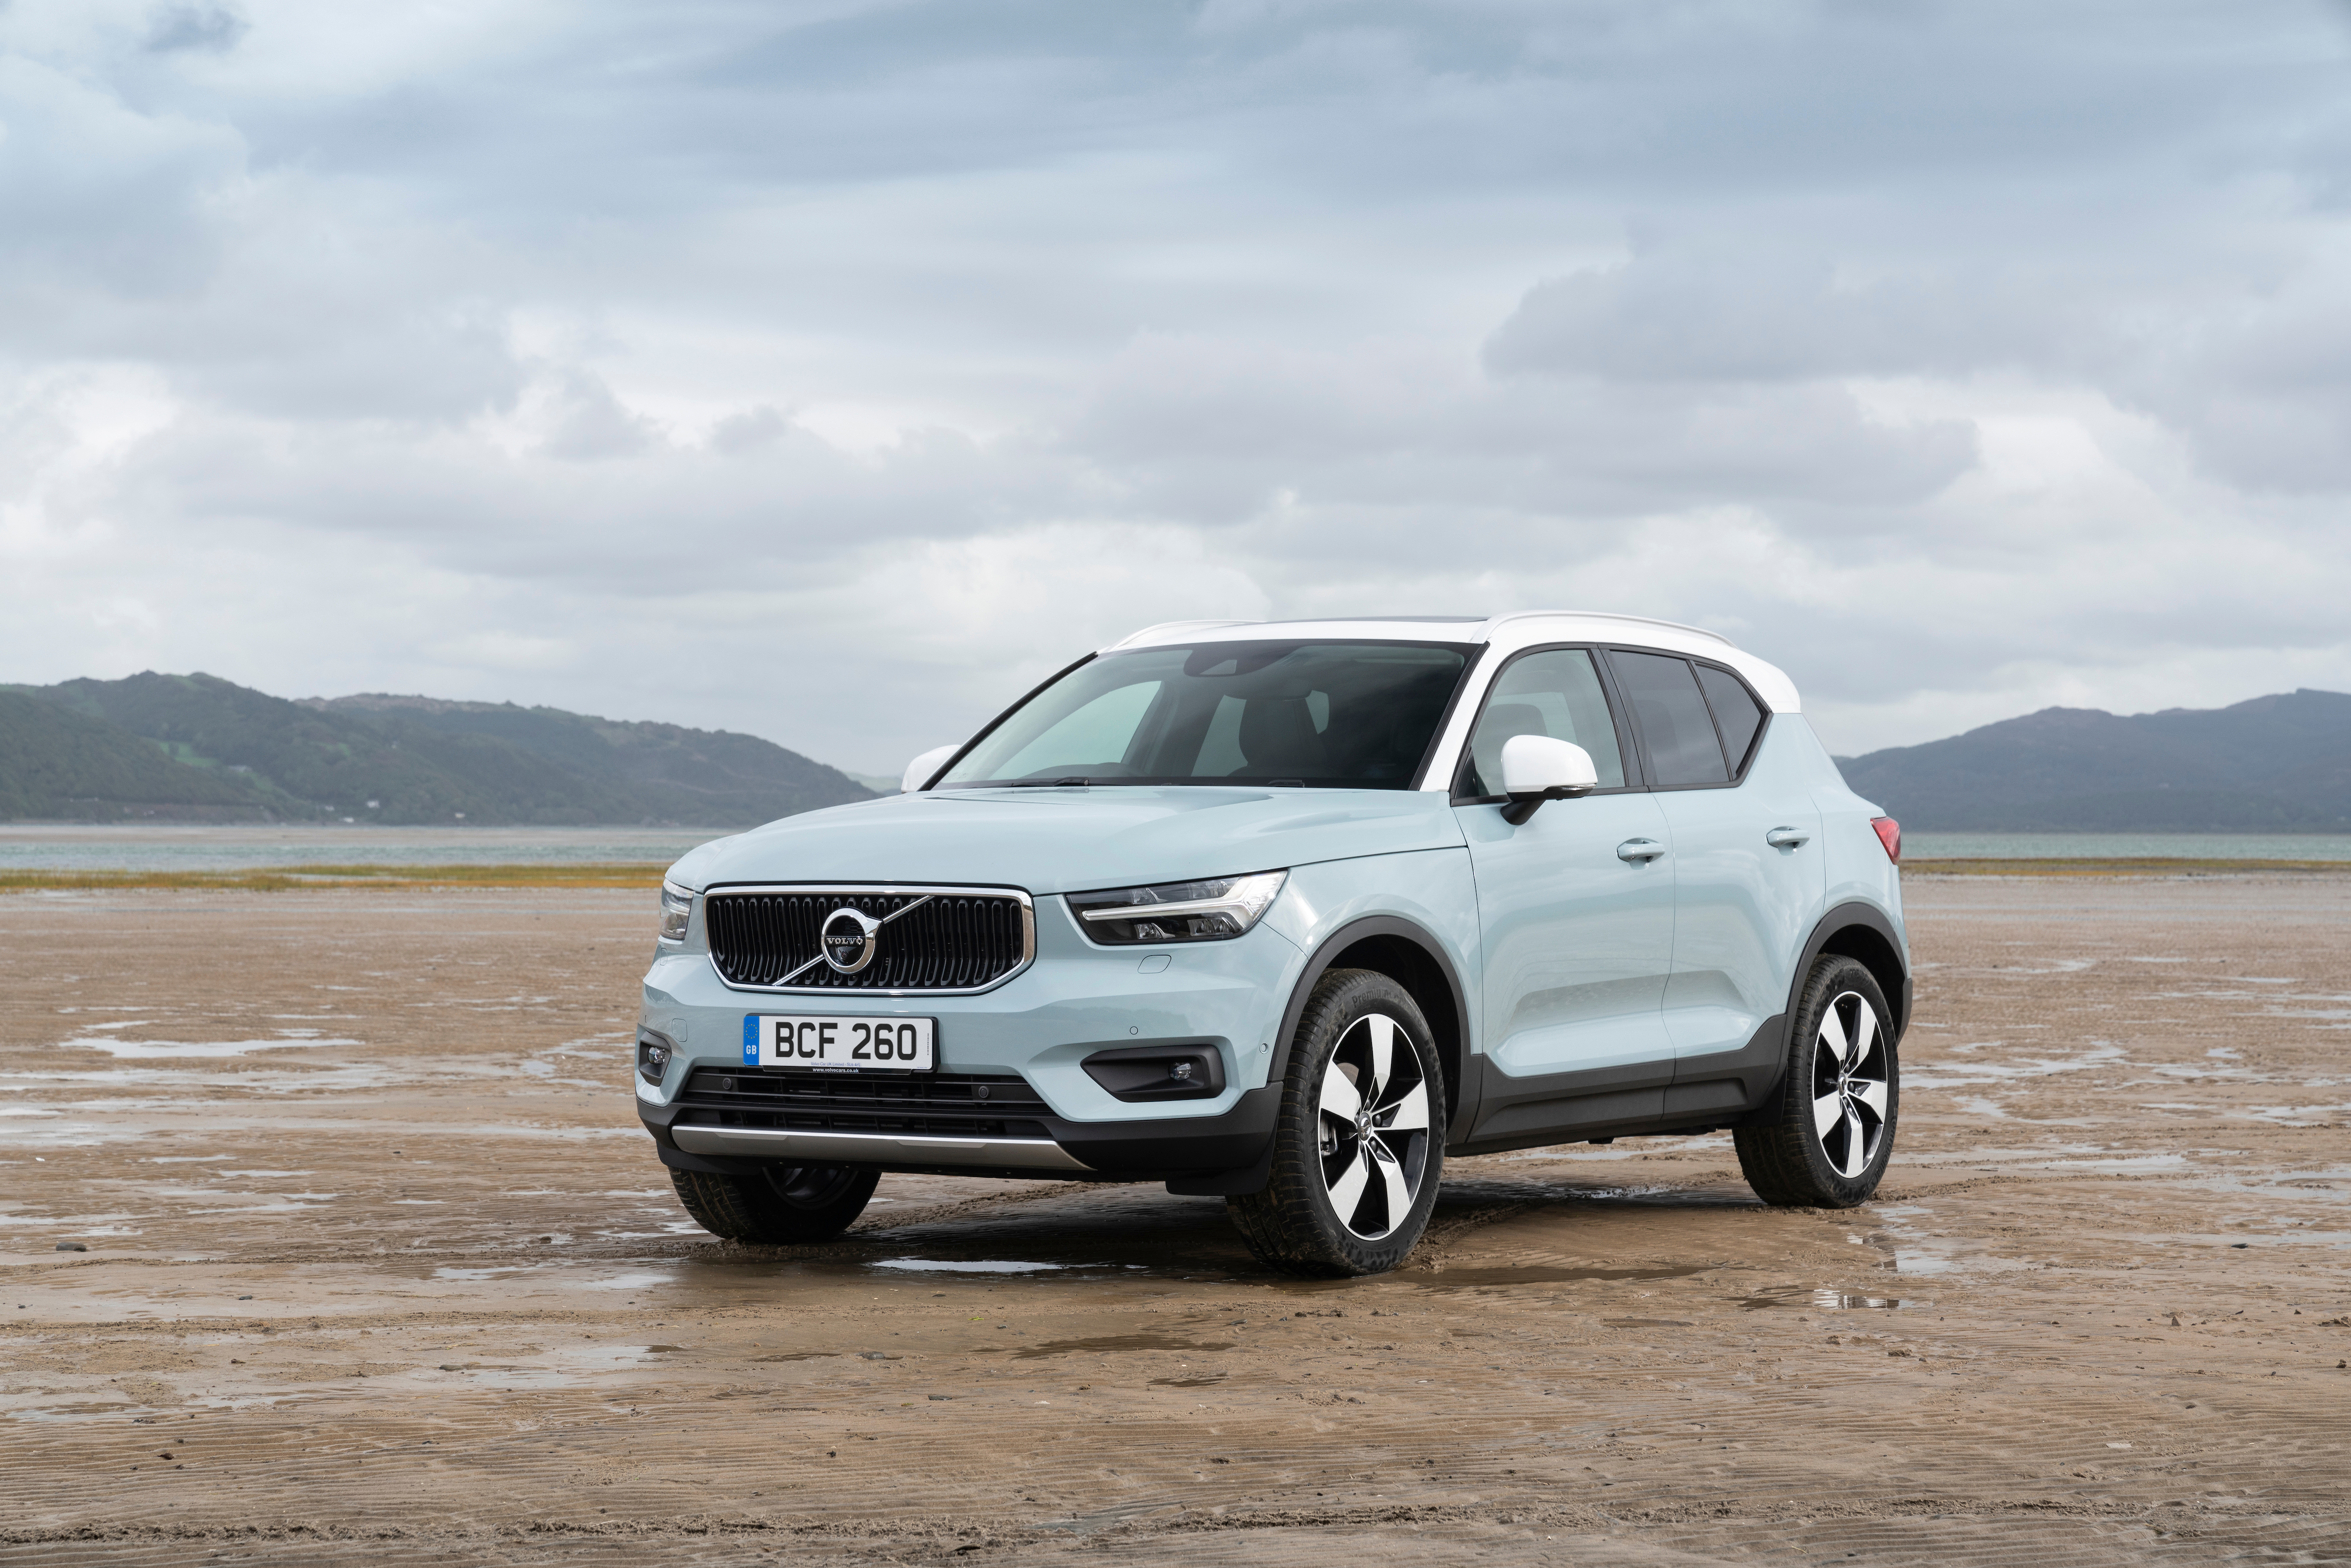 Steve Rogers casts and eye over the new Volvo XC40